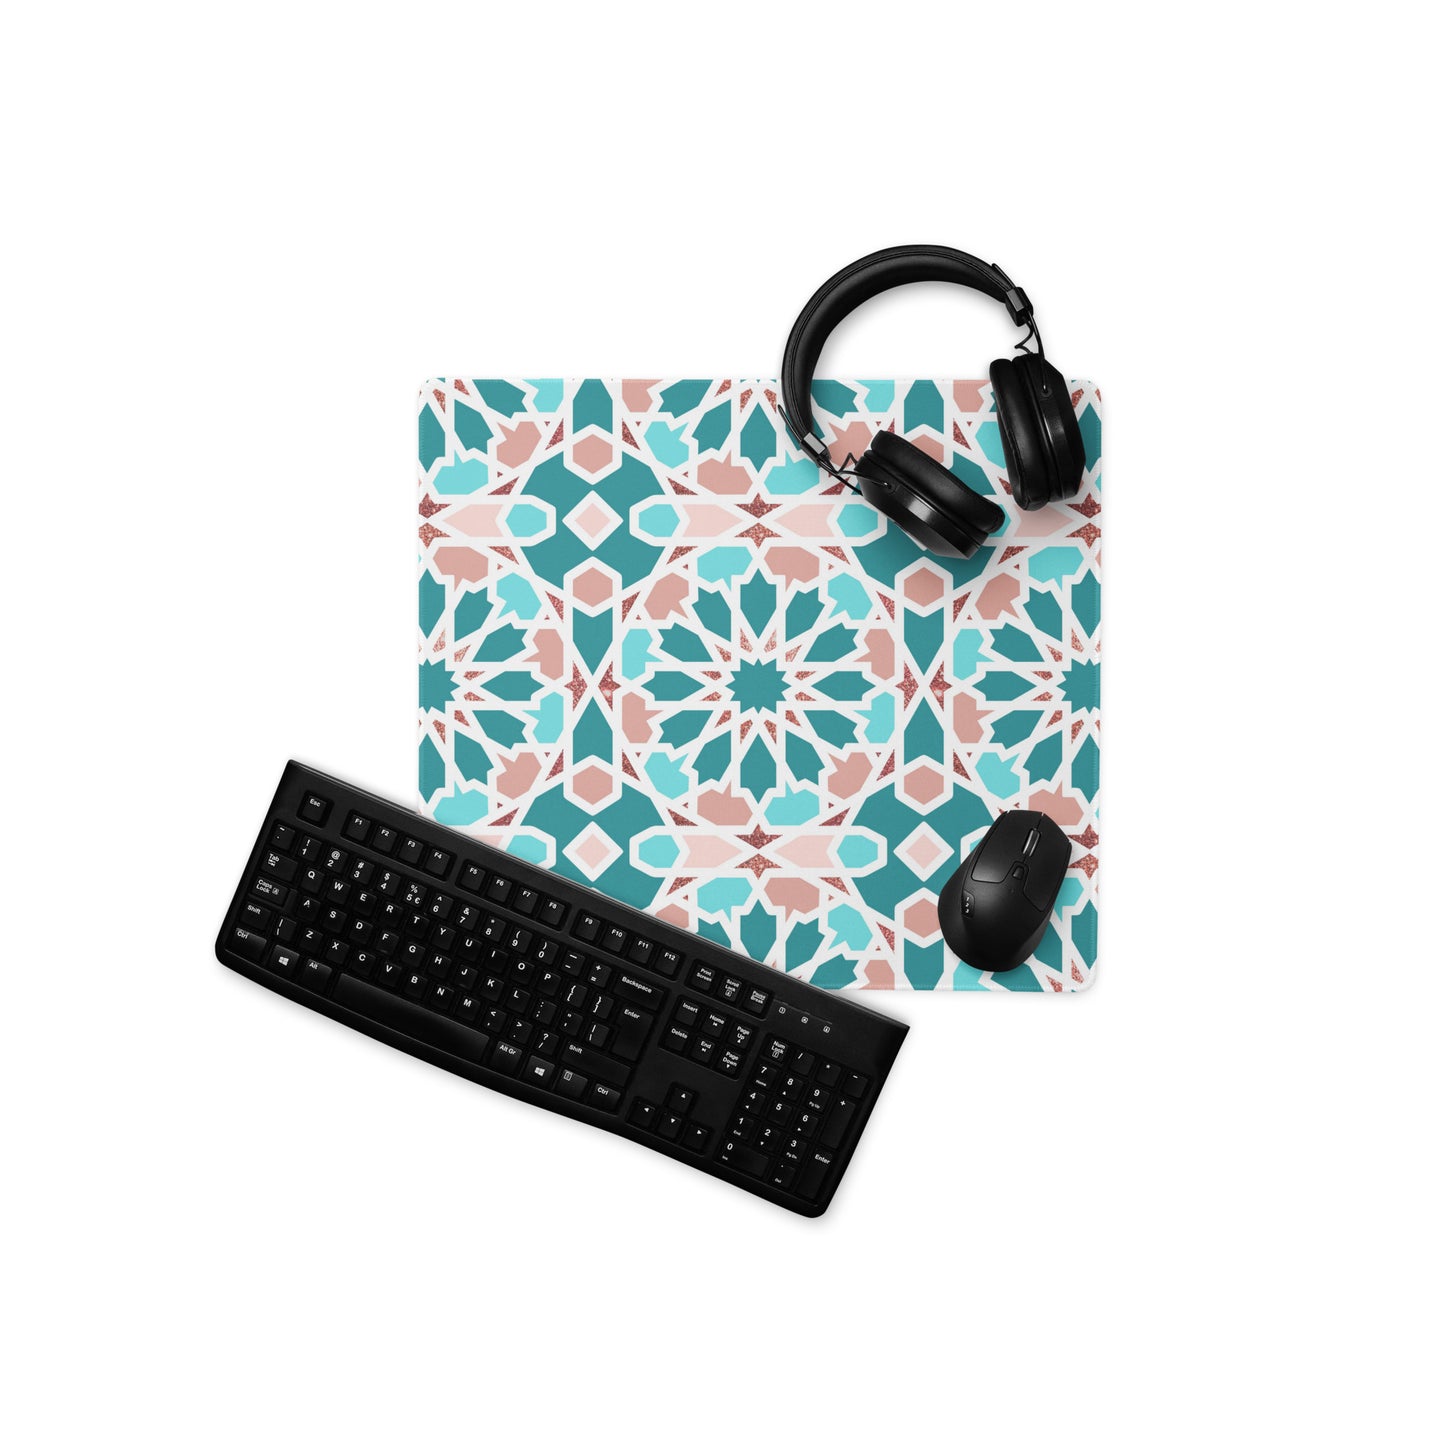 Gaming mouse pad - Geometric Pointed Star in Aqua